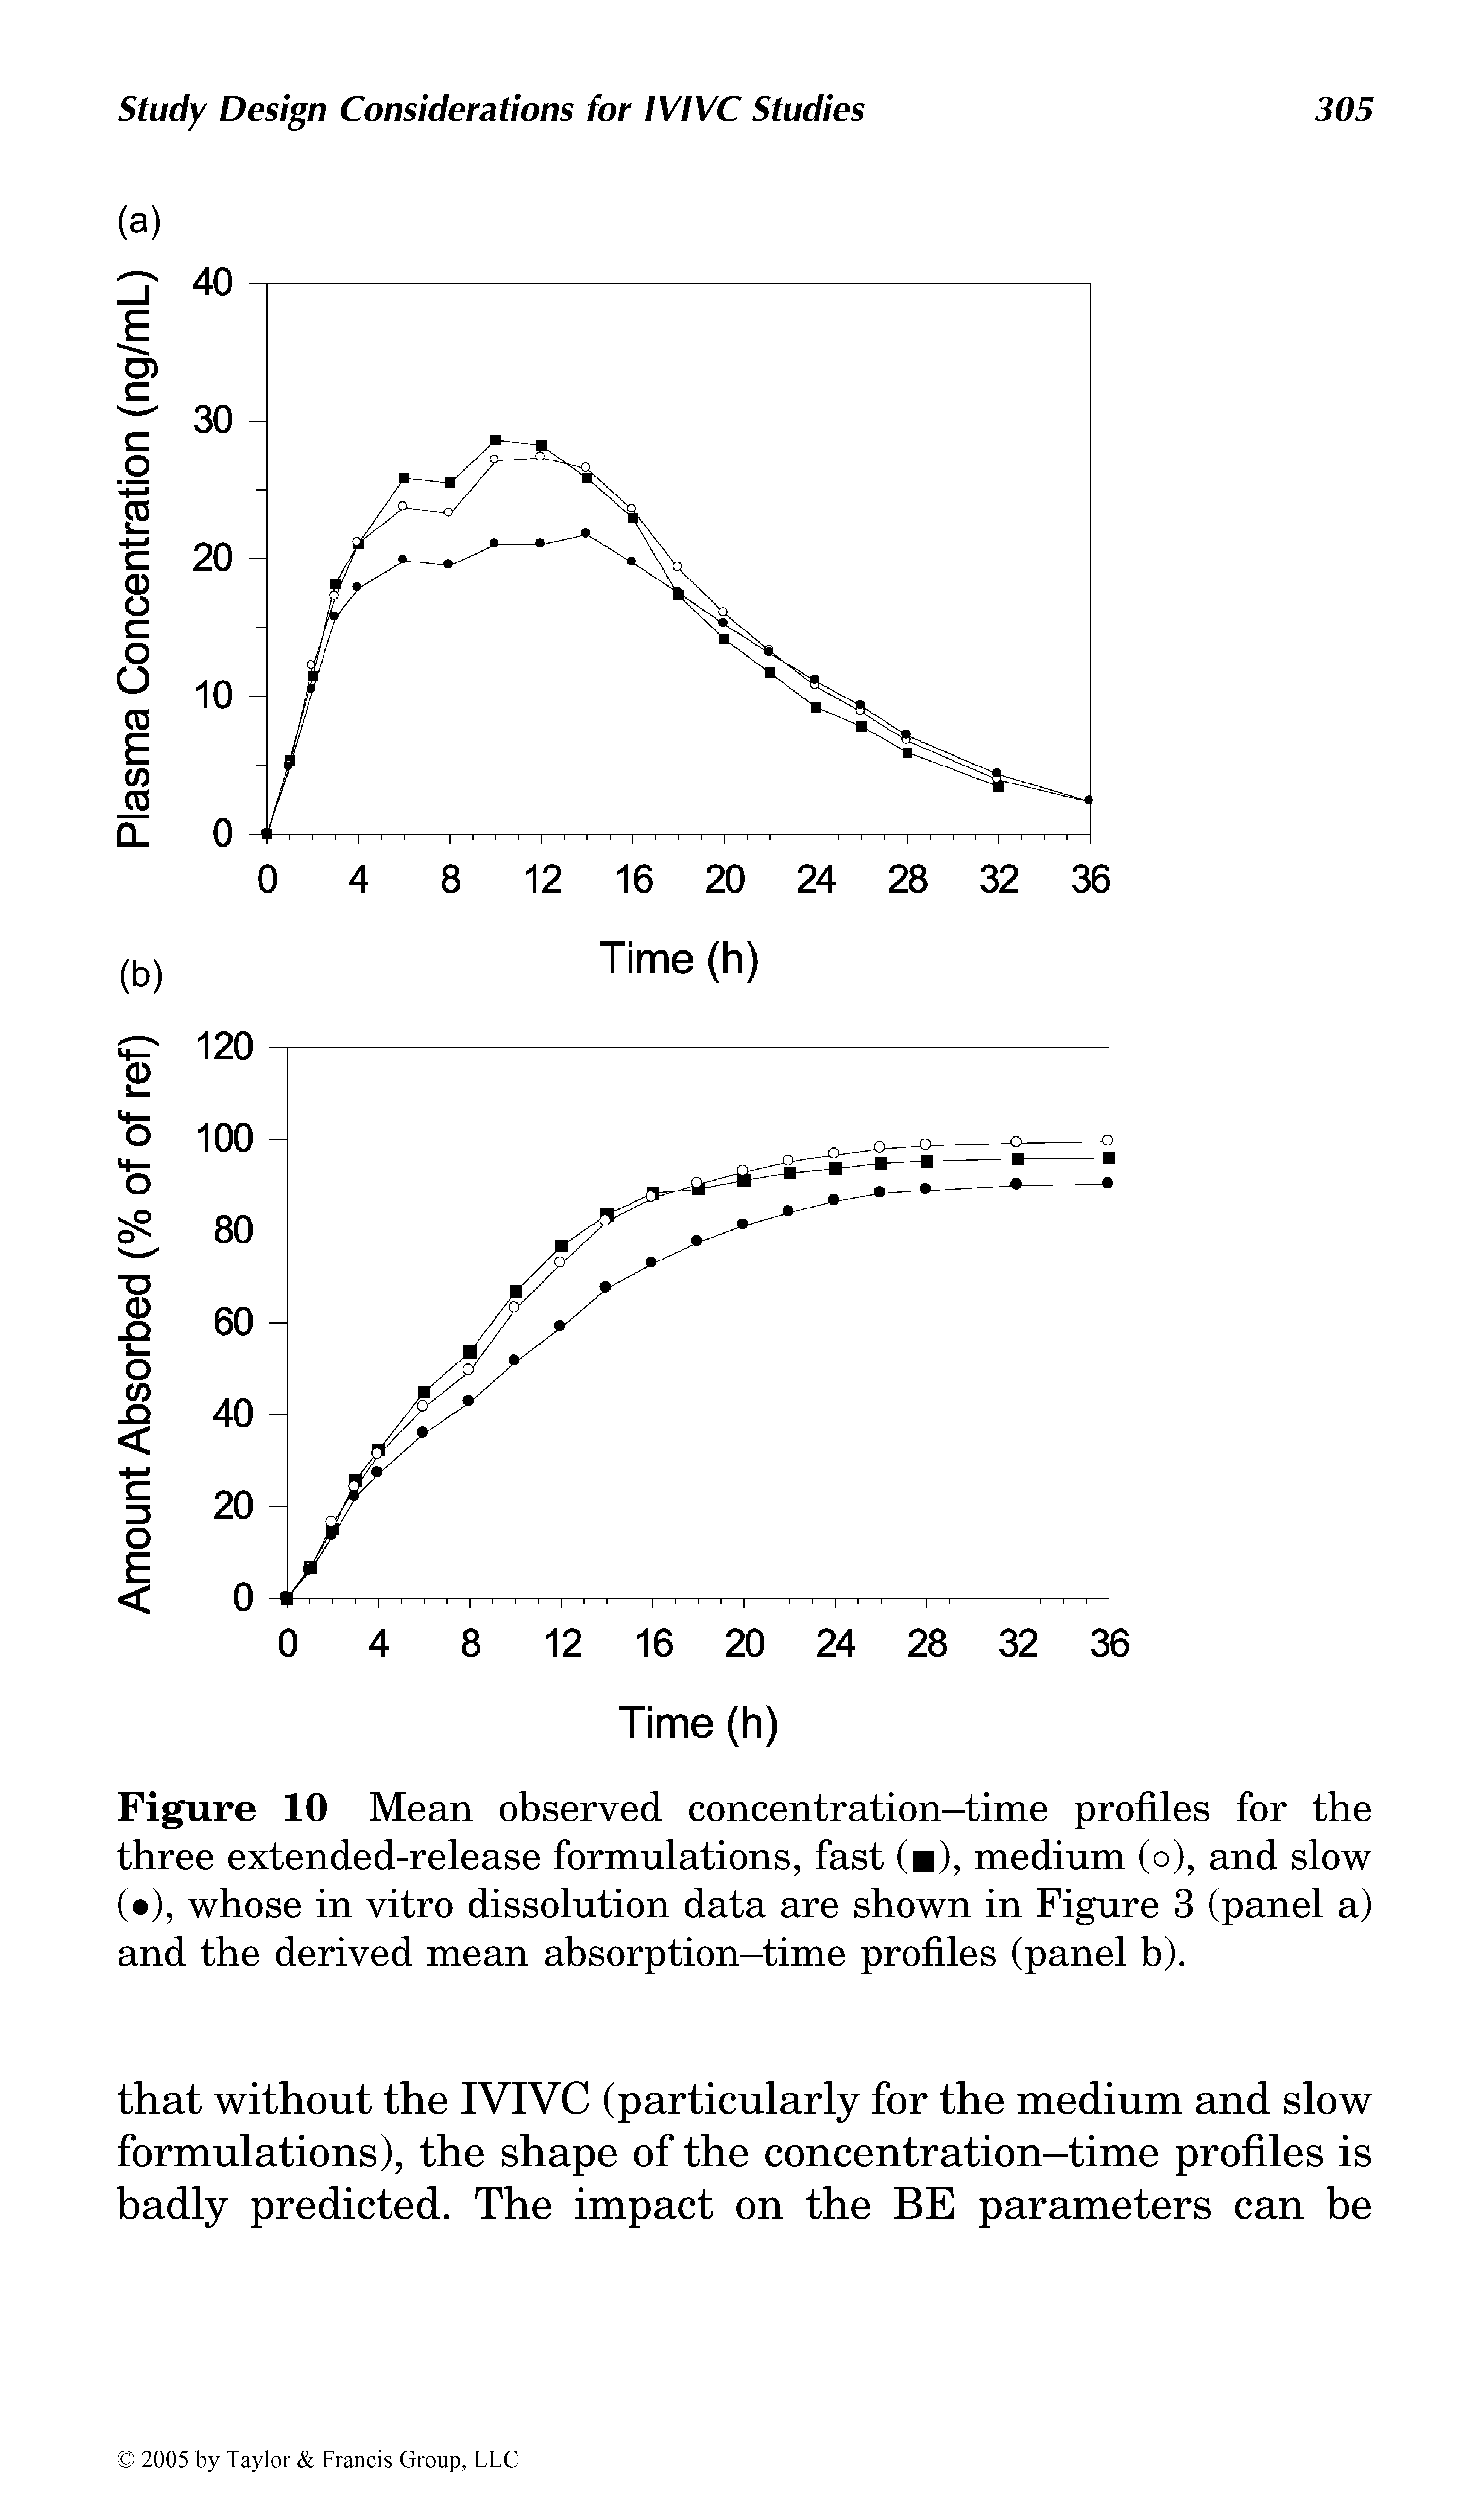 Figure 10 Mean observed concentration-time profiles for the three extended-release formulations, fast ( ), medium (o), and slow ( ), whose in vitro dissolution data are shown in Figure 3 (panel a) and the derived mean absorption-time profiles (panel b).